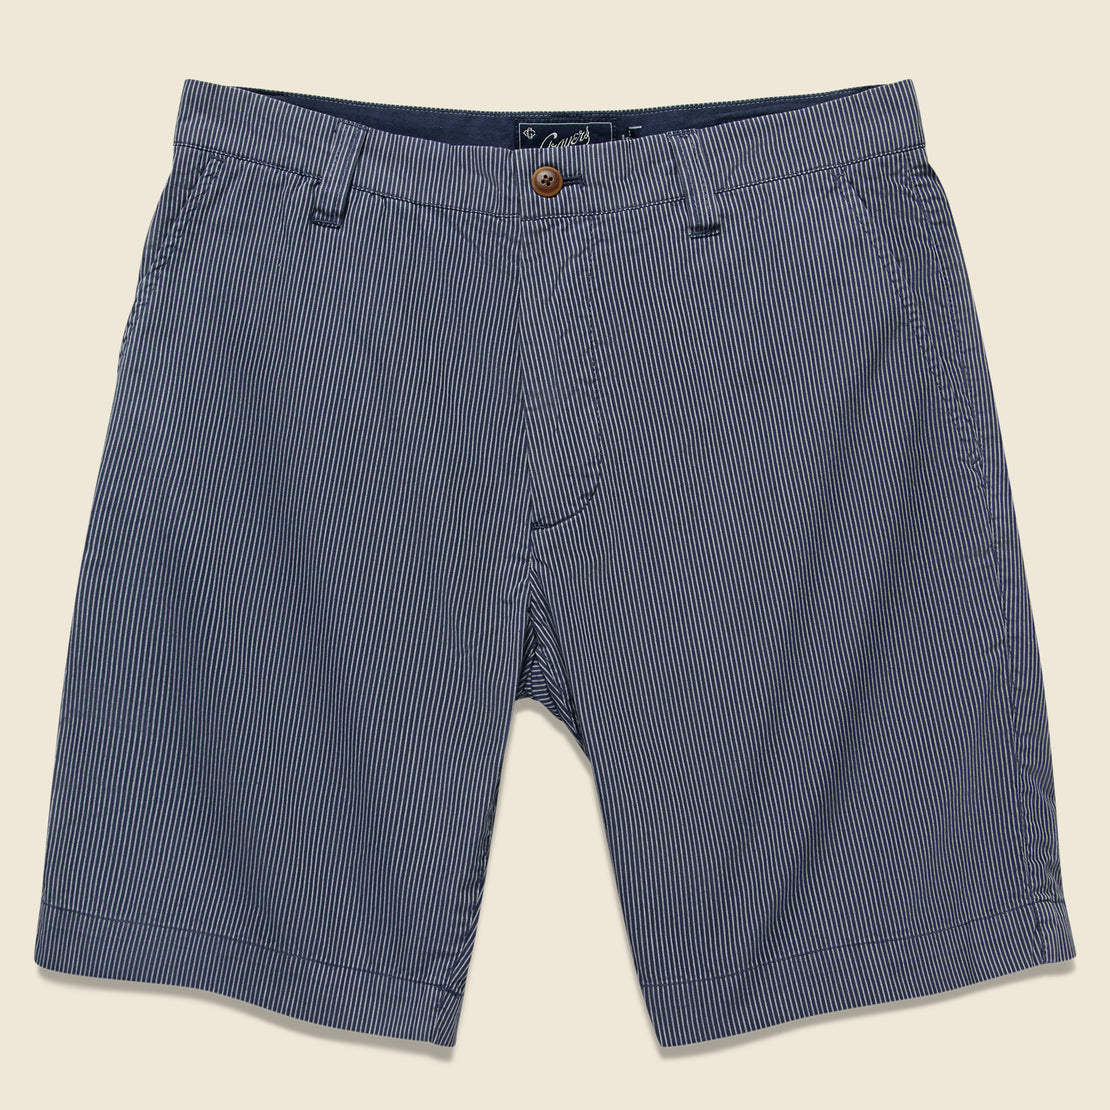 Grayers Maidstone Stripe Shorts - Grisaille Blue